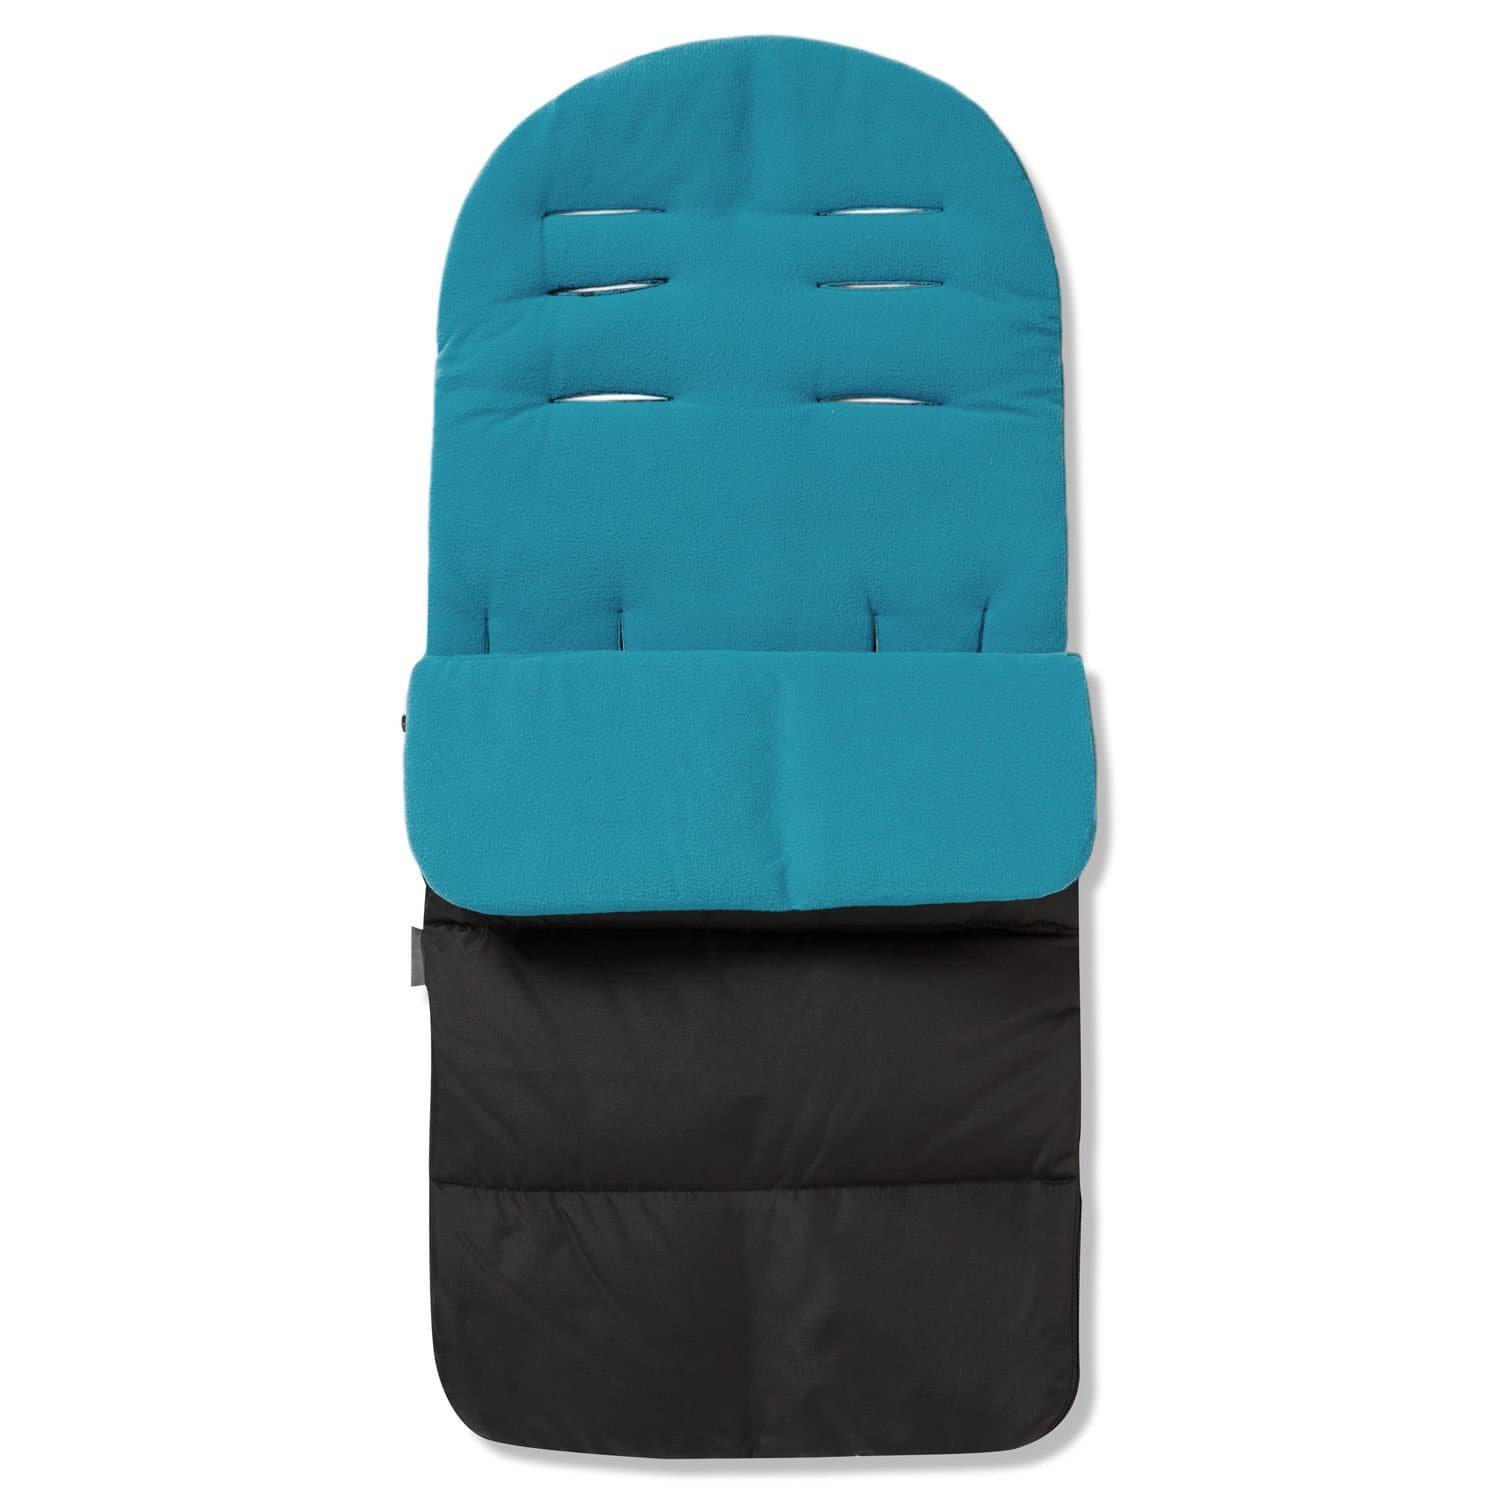 Premium Footmuff / Cosy Toes Compatible with Firstwheels - Ocean Blue / Fits All Models | For Your Little One